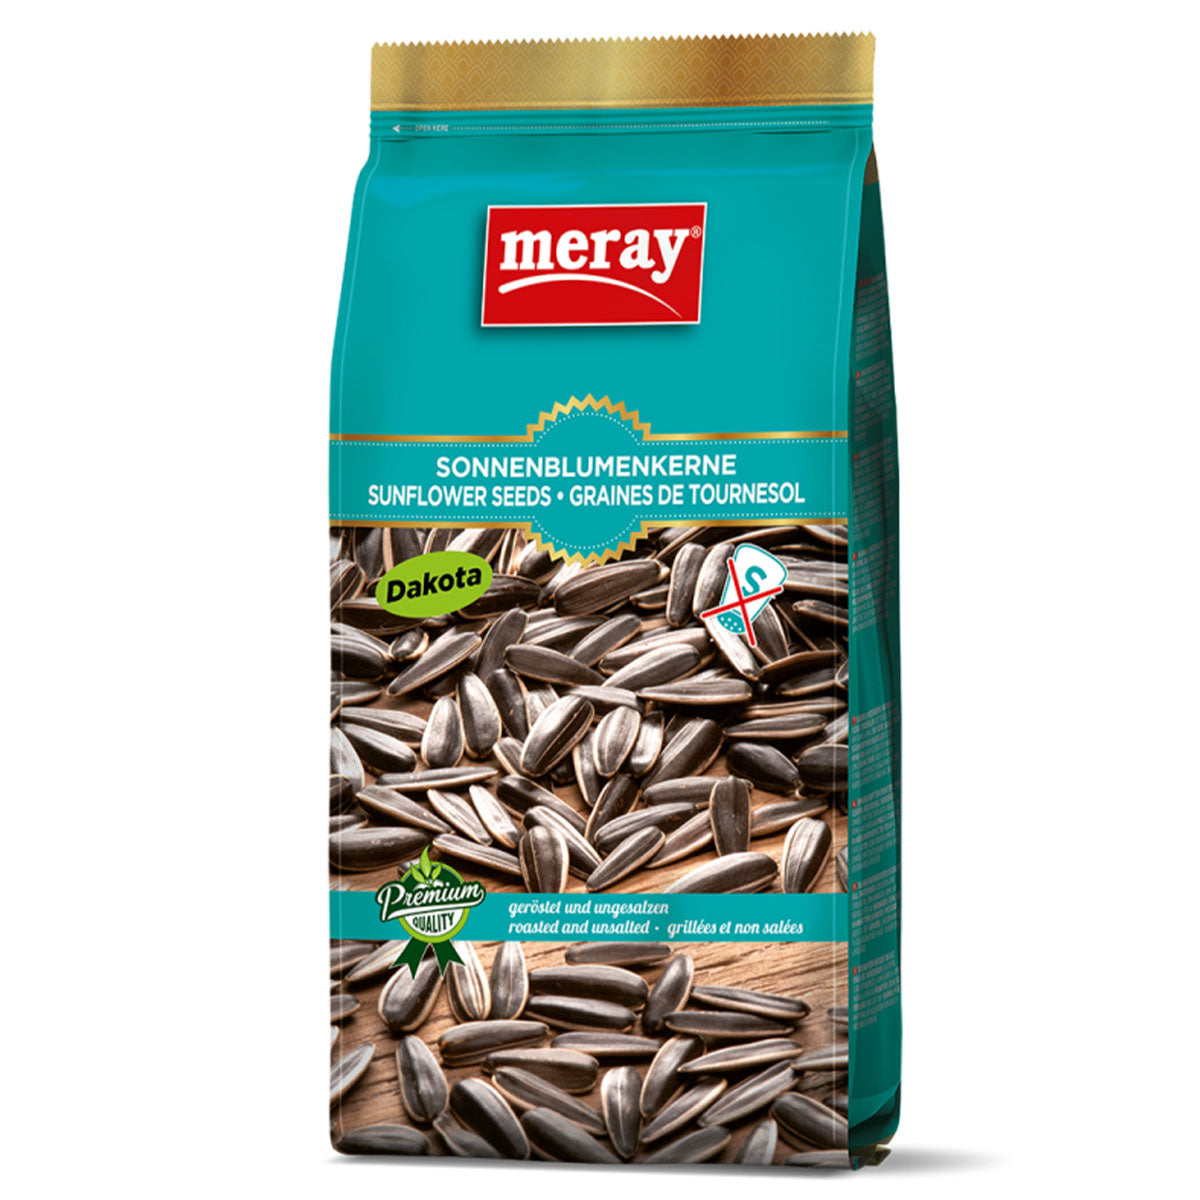 Meray - Unsalted Black Sunflower Seeds - 250g - Continental Food Store